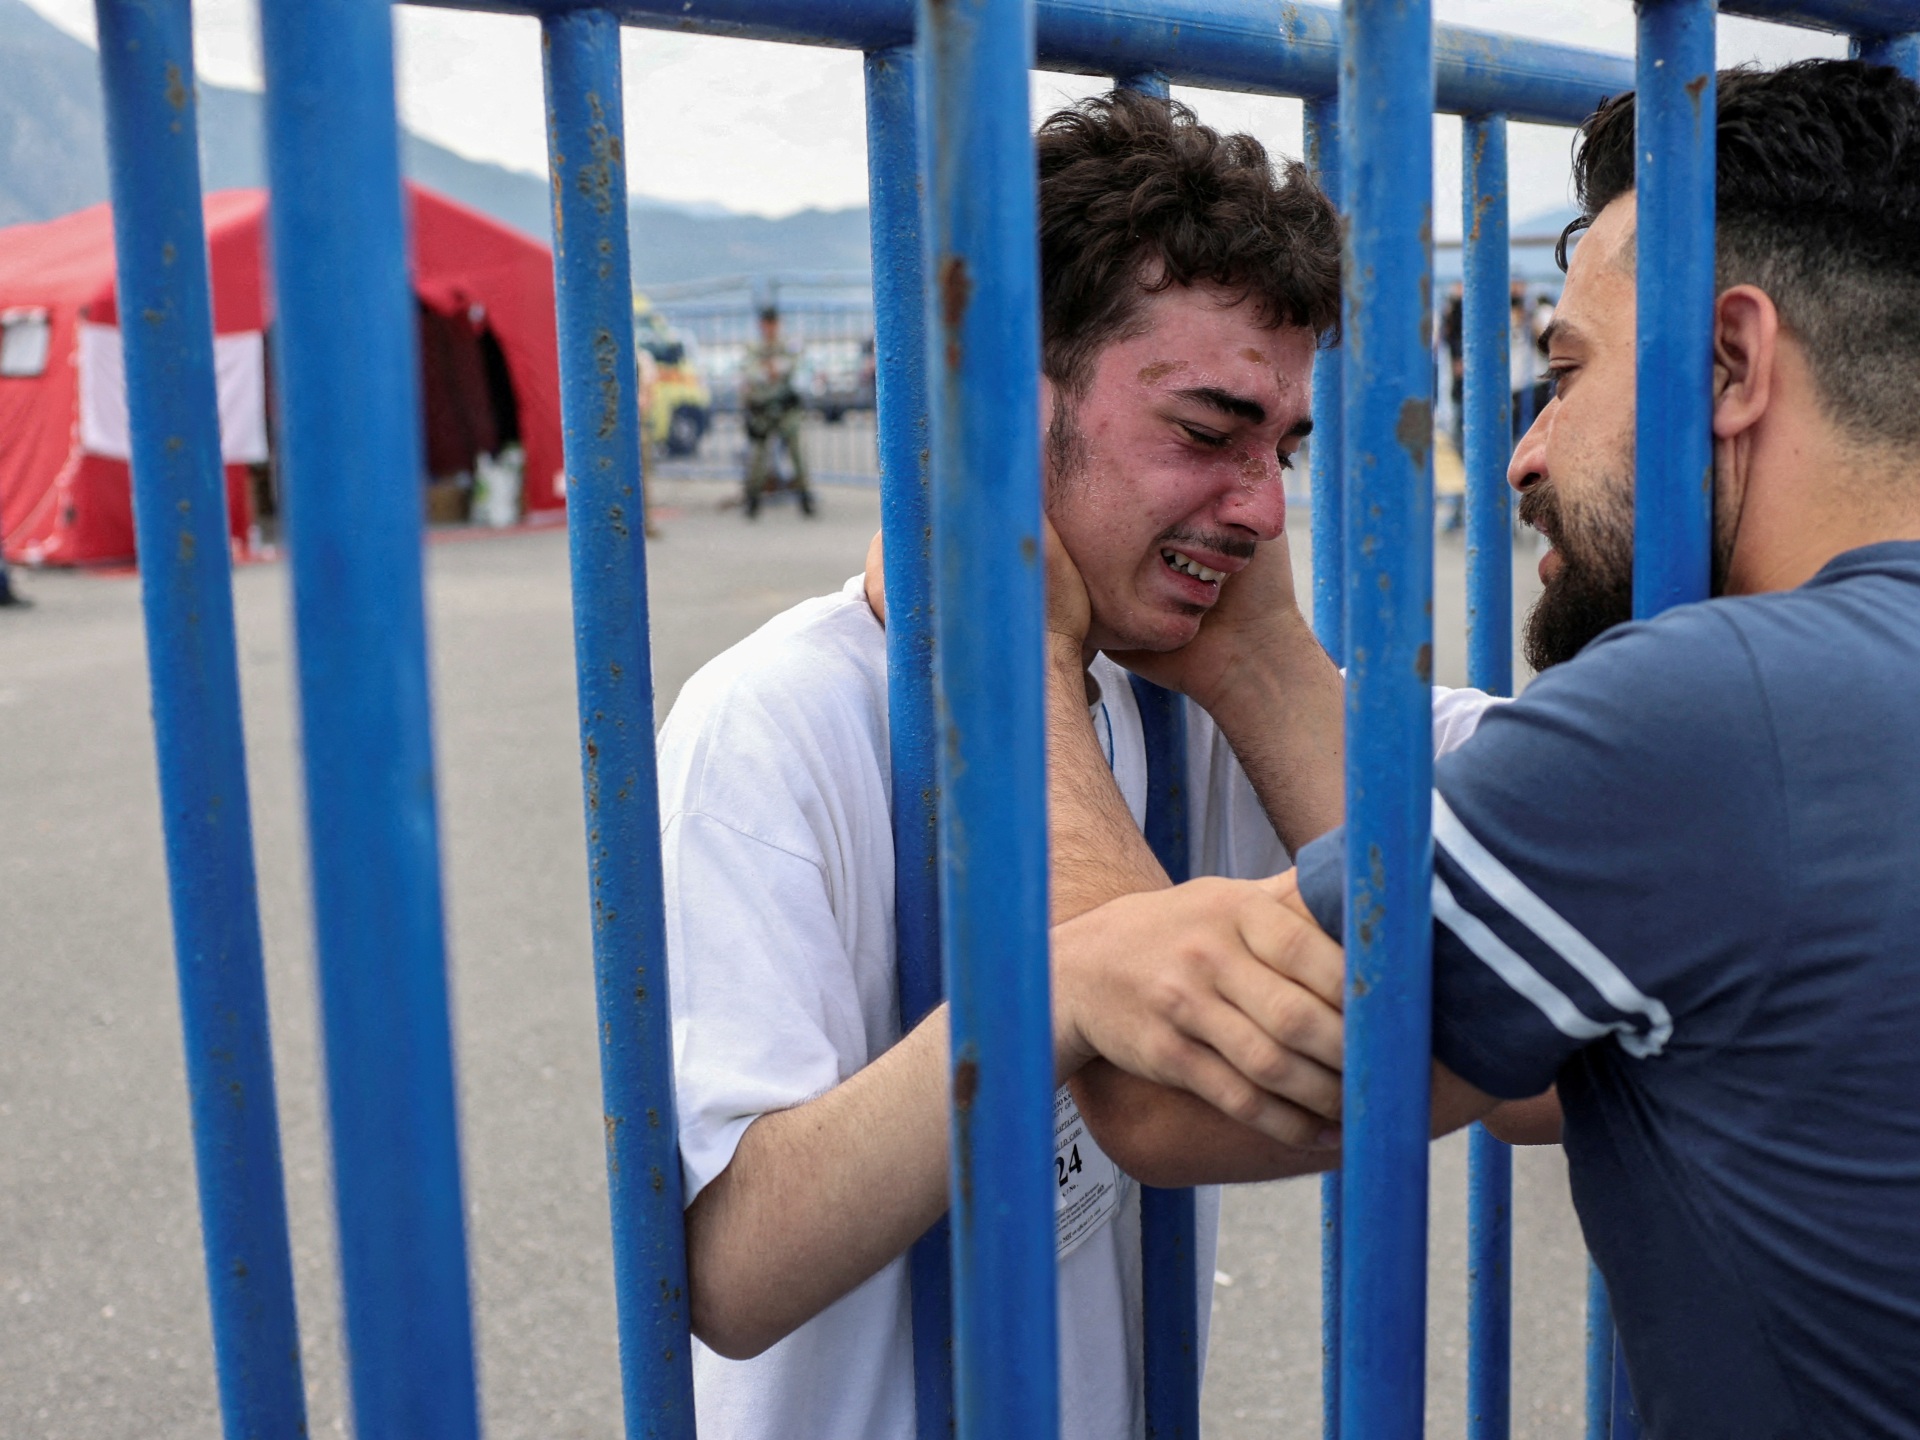 Greek Migrant Boat Wreck Tragedy: A Grim Reminder of Europe's Ongoing Refugee Crisis. 26